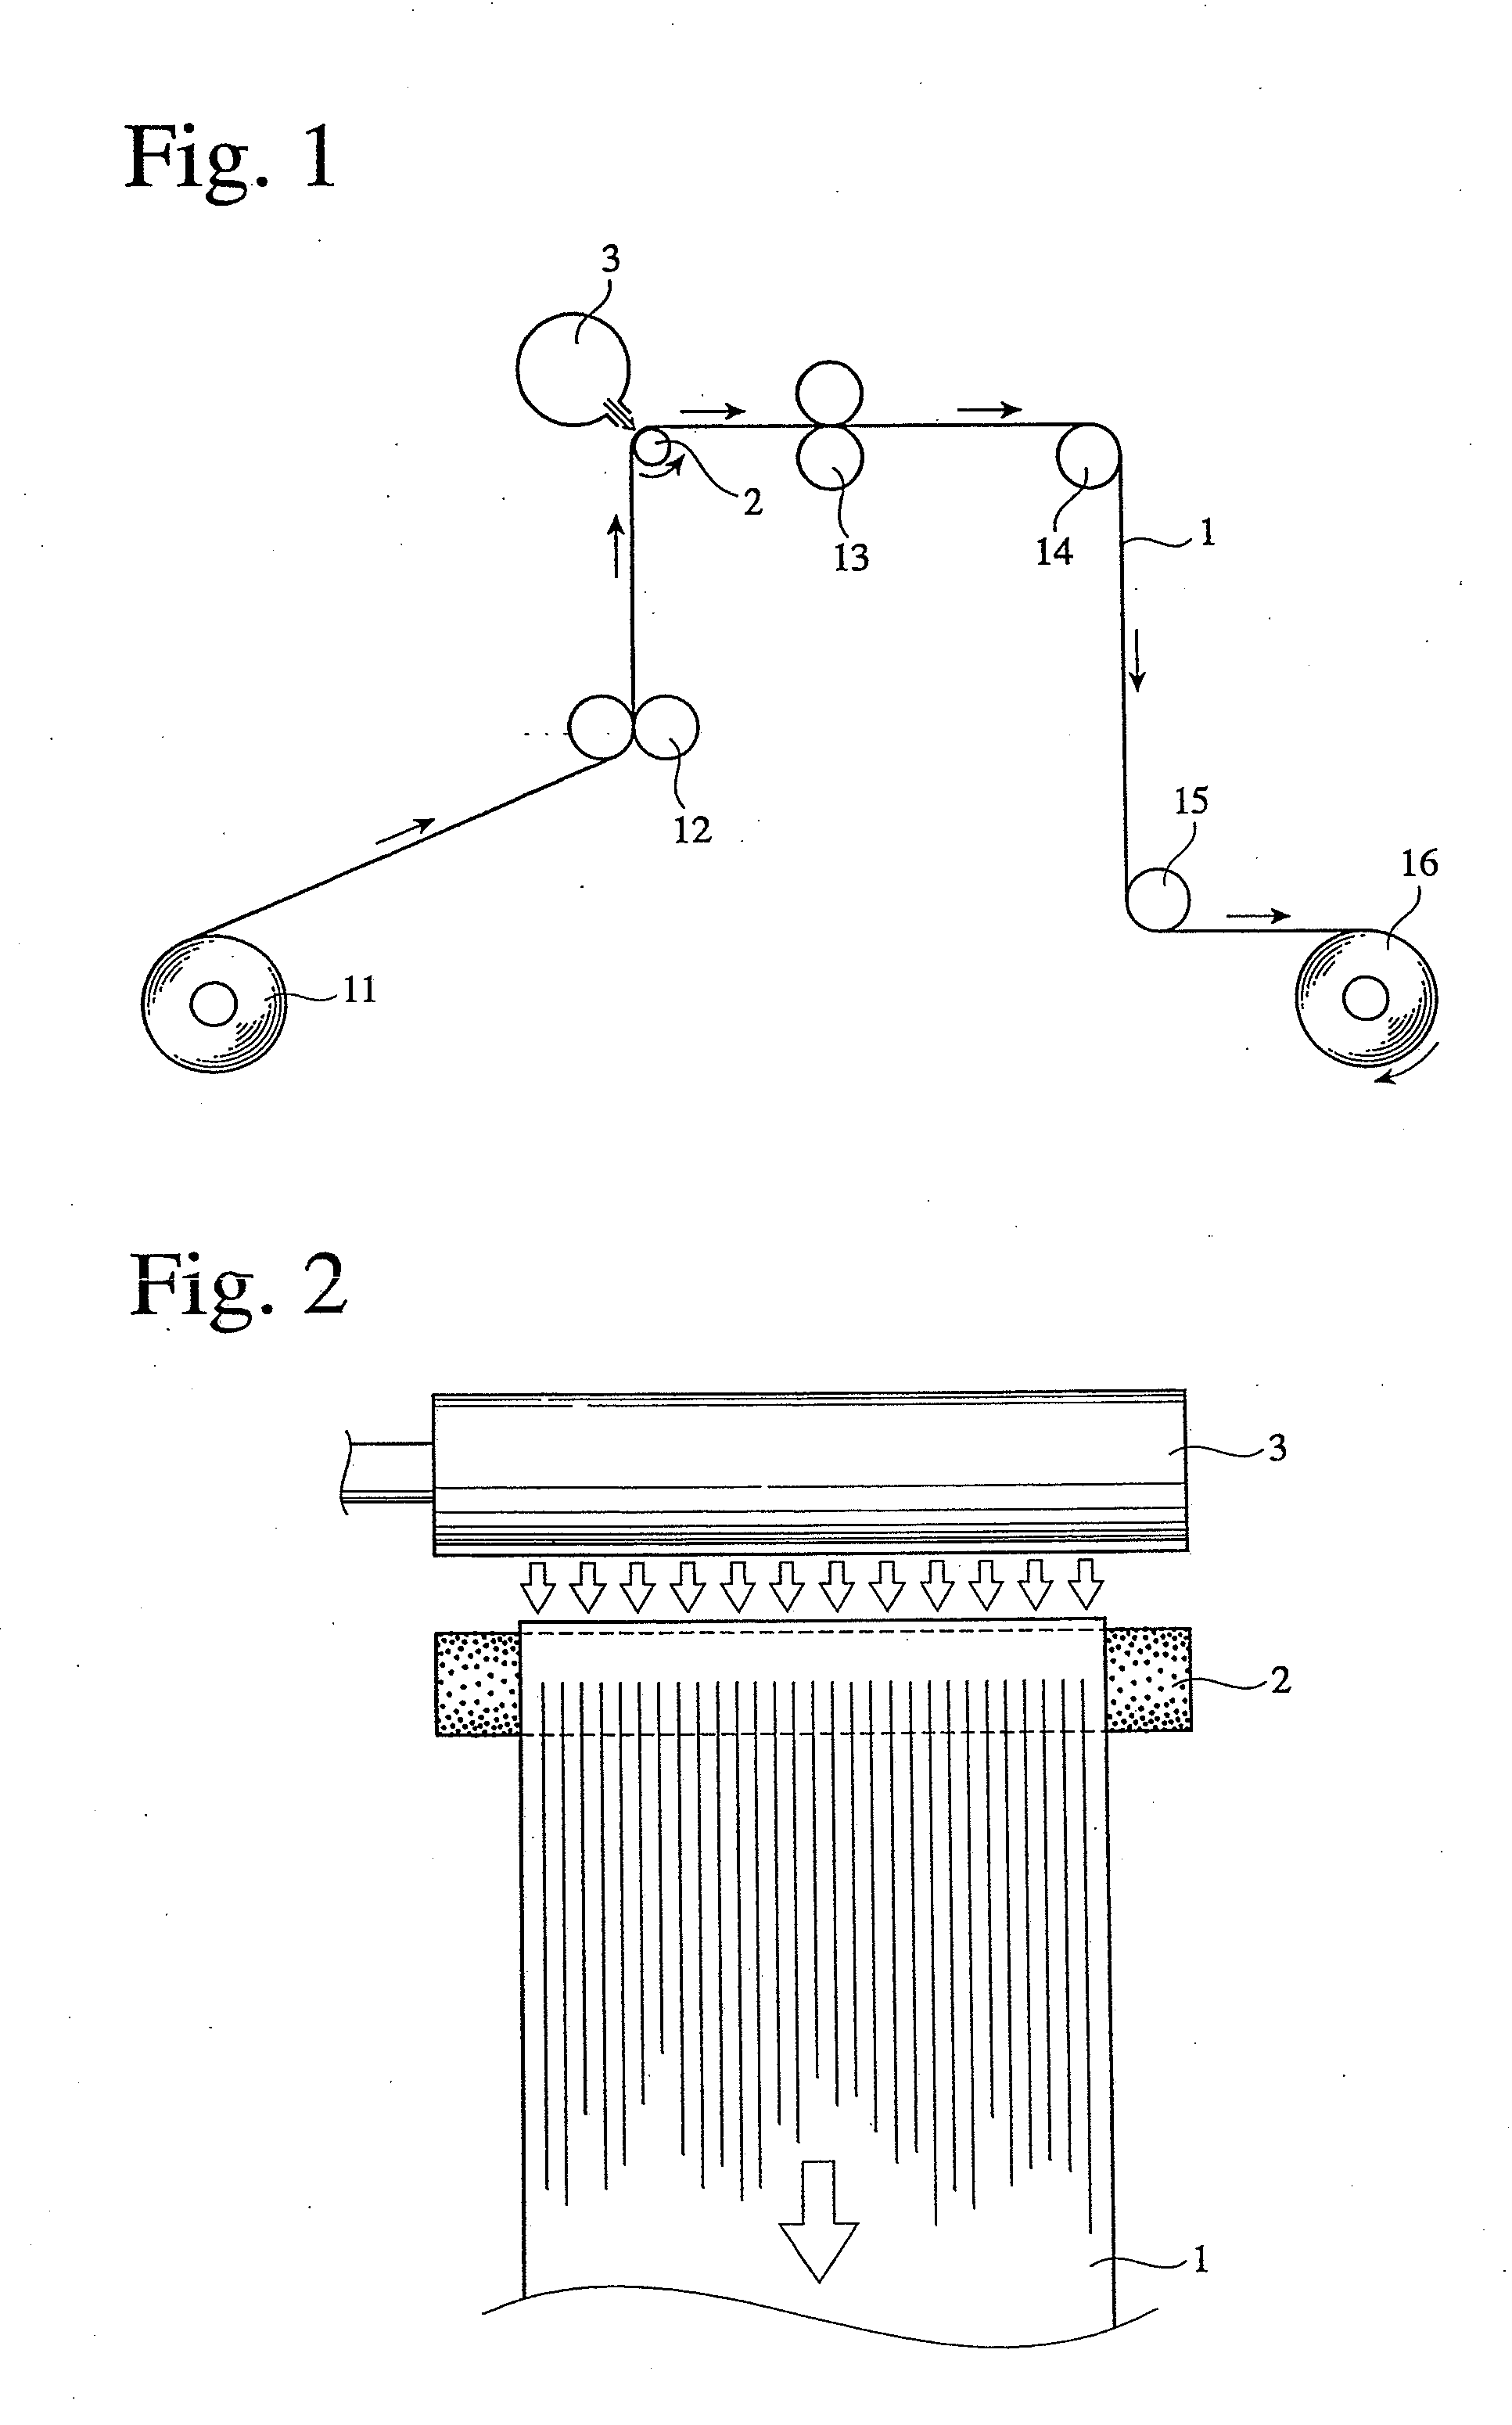 Easy-to-straight-tearing thermoplastic resin film and its production method and apparatus